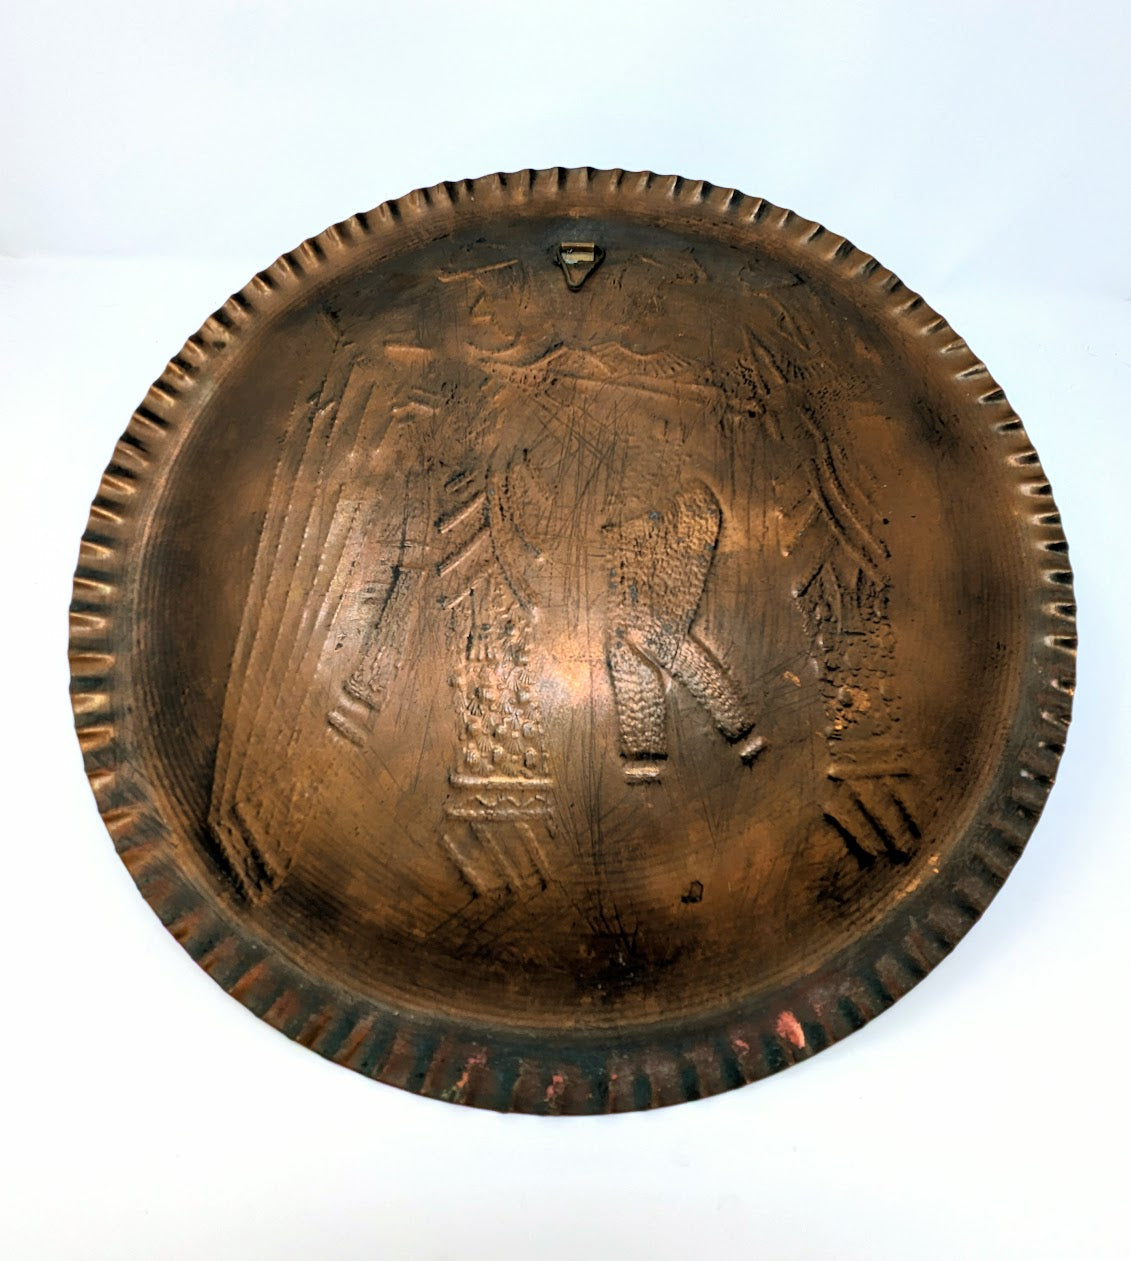 Vintage Hammered & Etched Copper Plate with Ancient Egyptian Motif